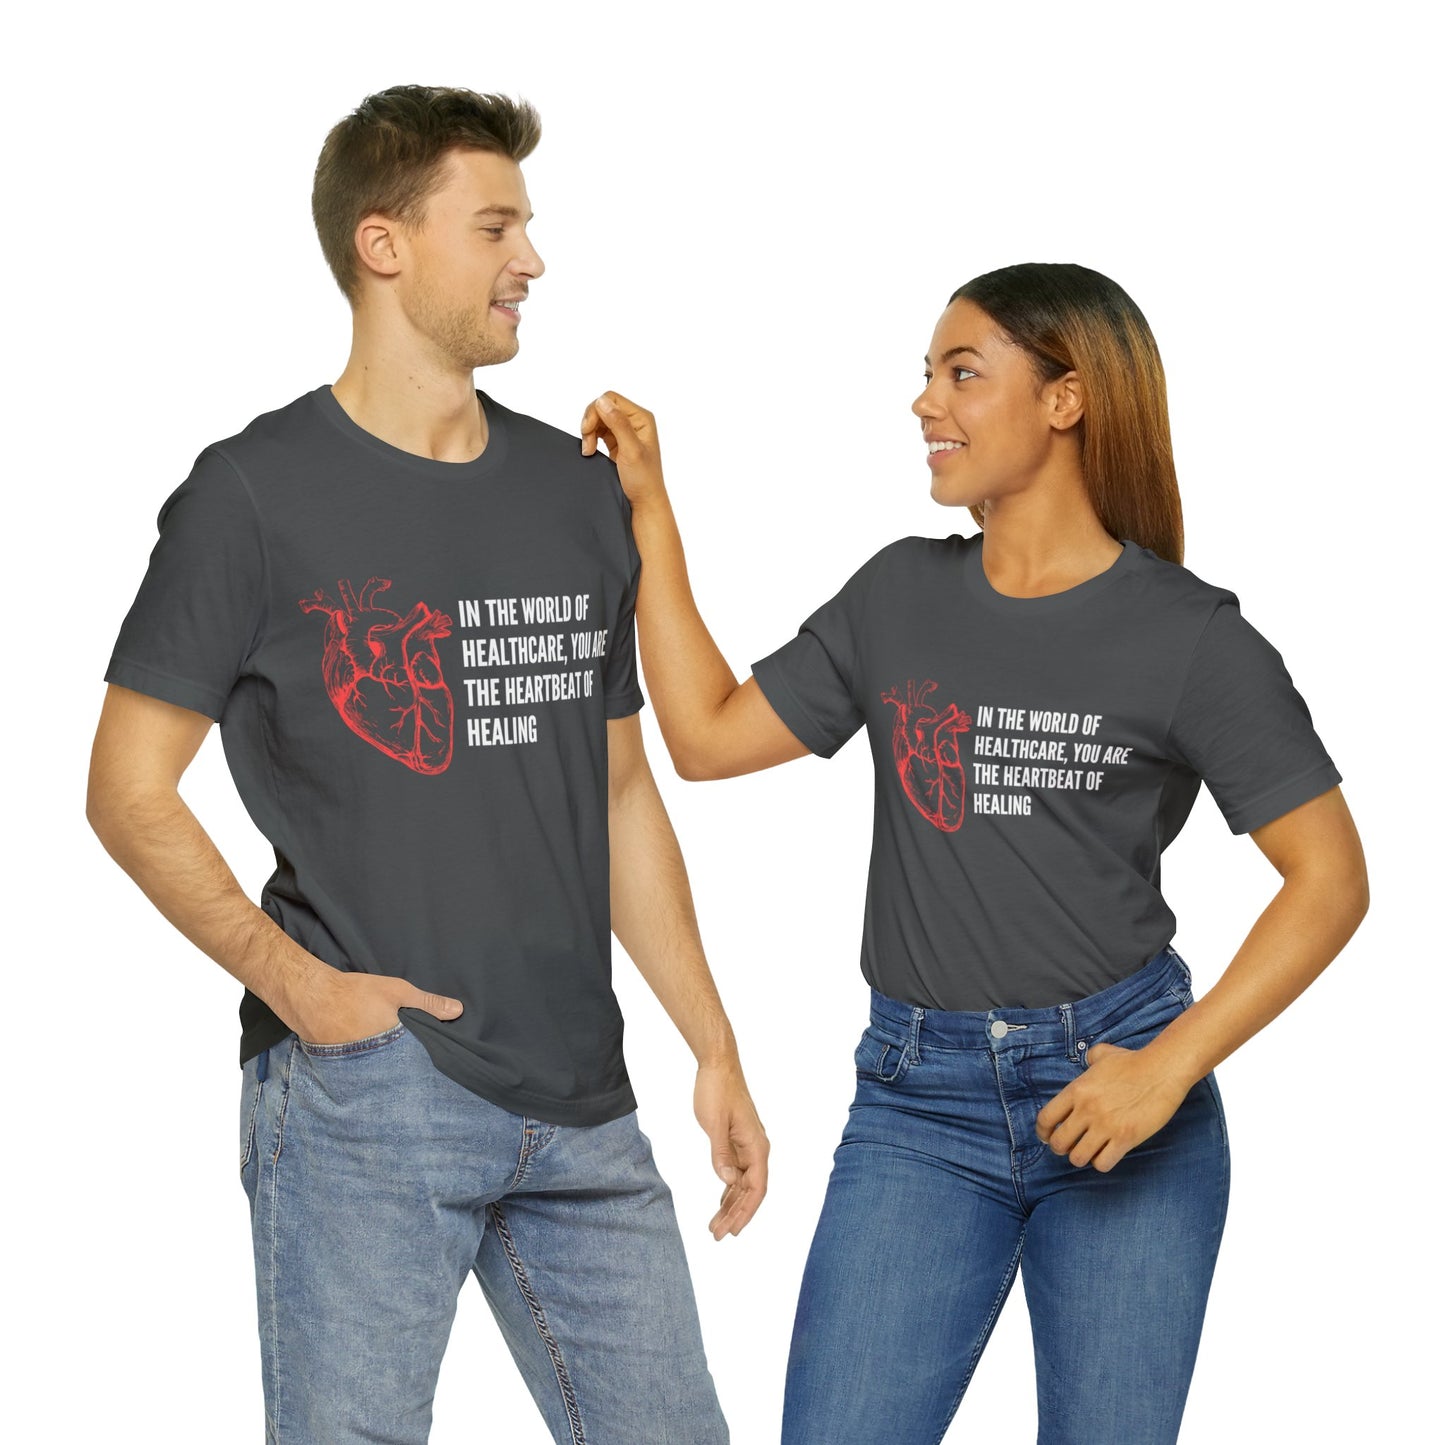 In the world of healthcare, you are the heartbeat of healing Unisex Jersey Short Sleeve Tee